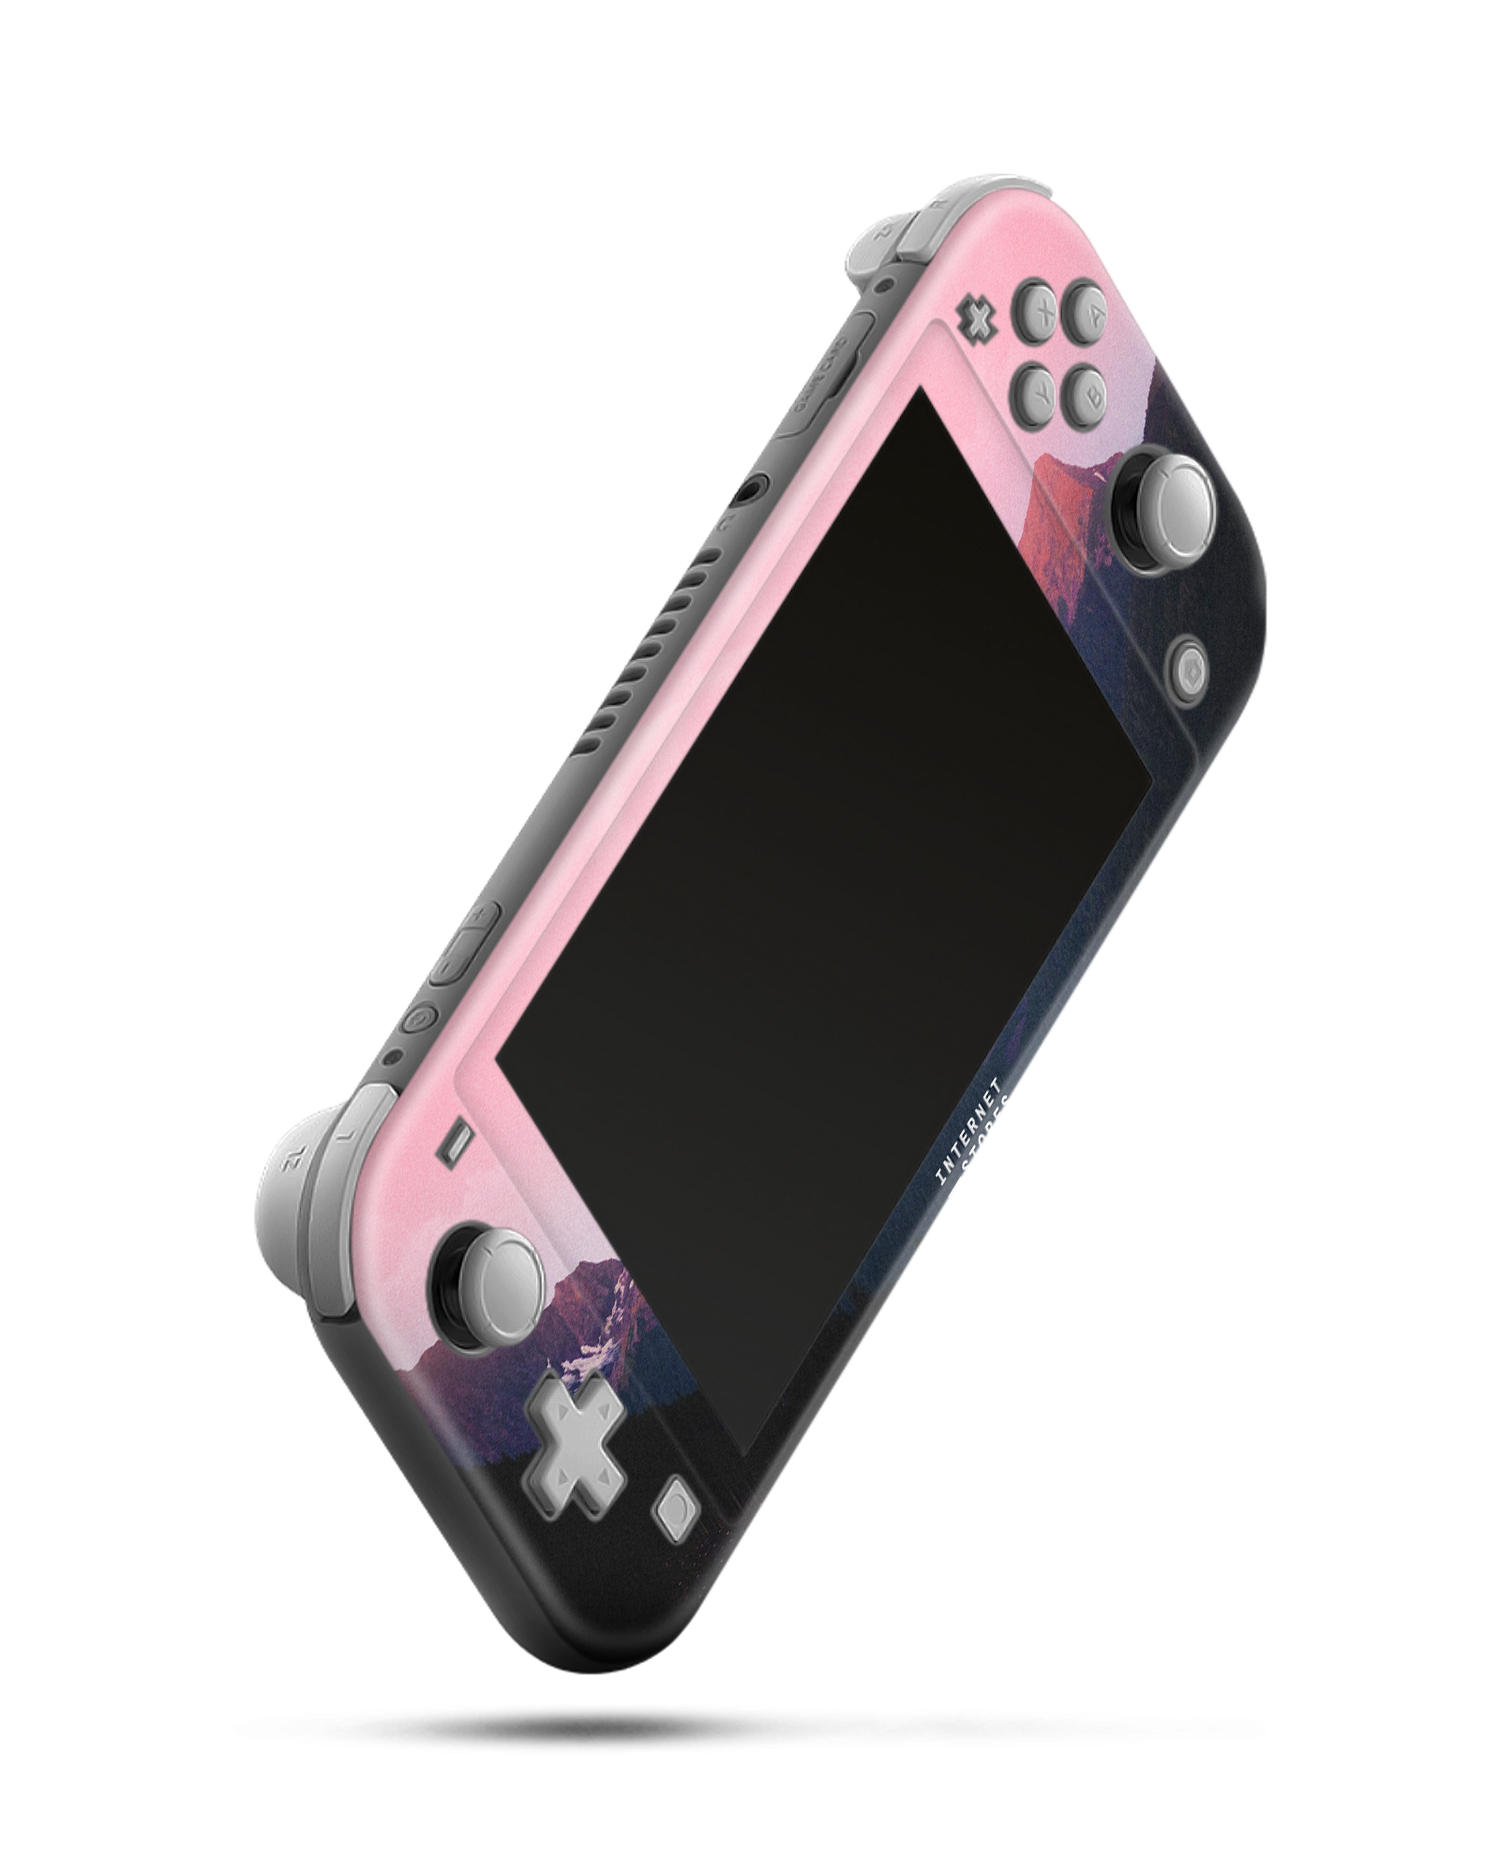 Lake Console Skin for Nintendo Switch Lite: Side view